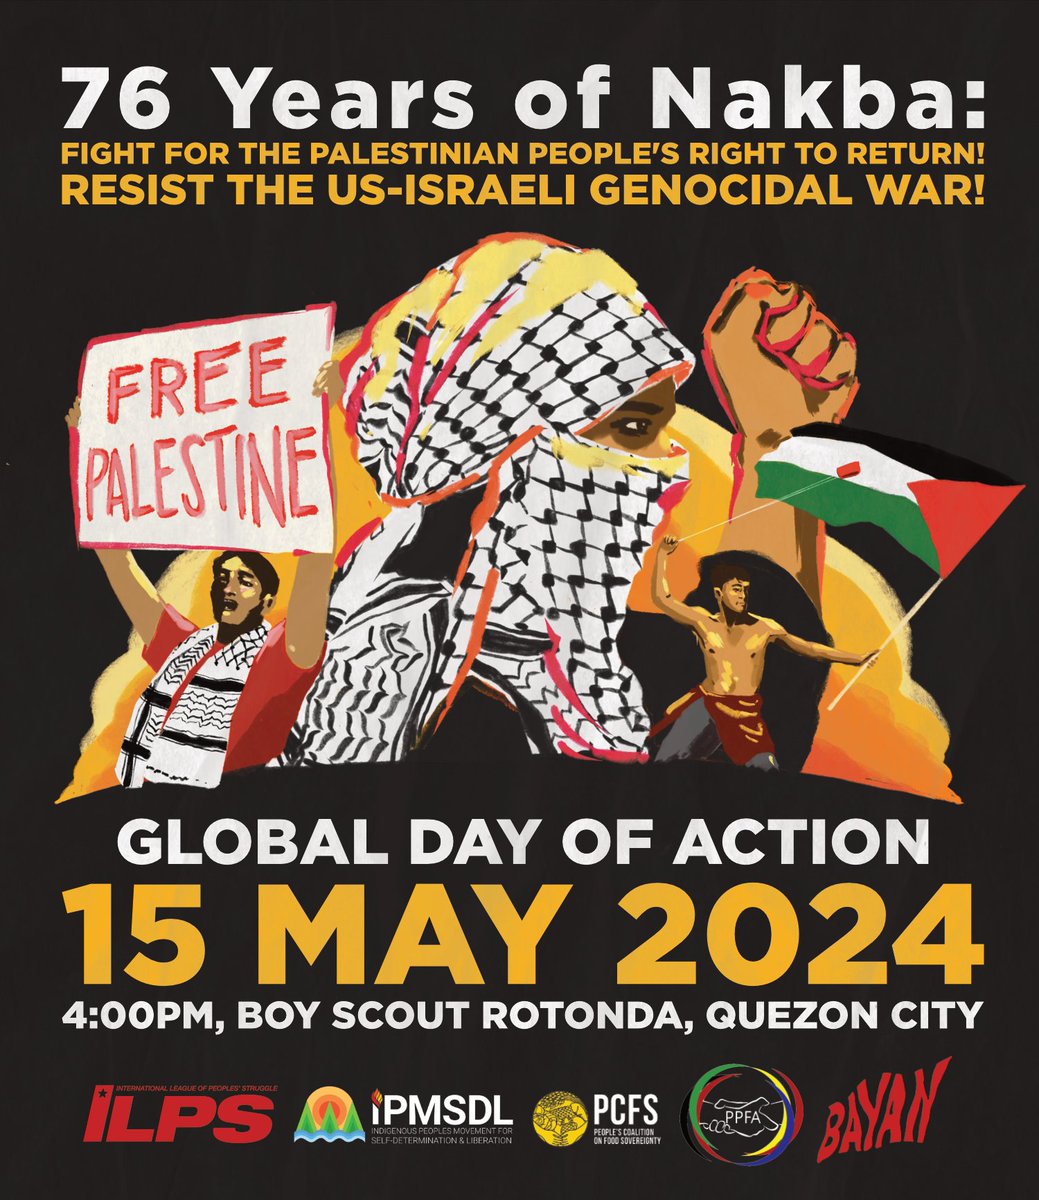 This May 15, let us stand with the Palestinian people's resistance and right to return as they commemorate the 76th Nakba Day, a gruesome history of their institutionalized oppression and ethnic cleansing in 1948. 4 pm | Boy Scout Rotonda #FreePalestine #ResistanceUntilReturn